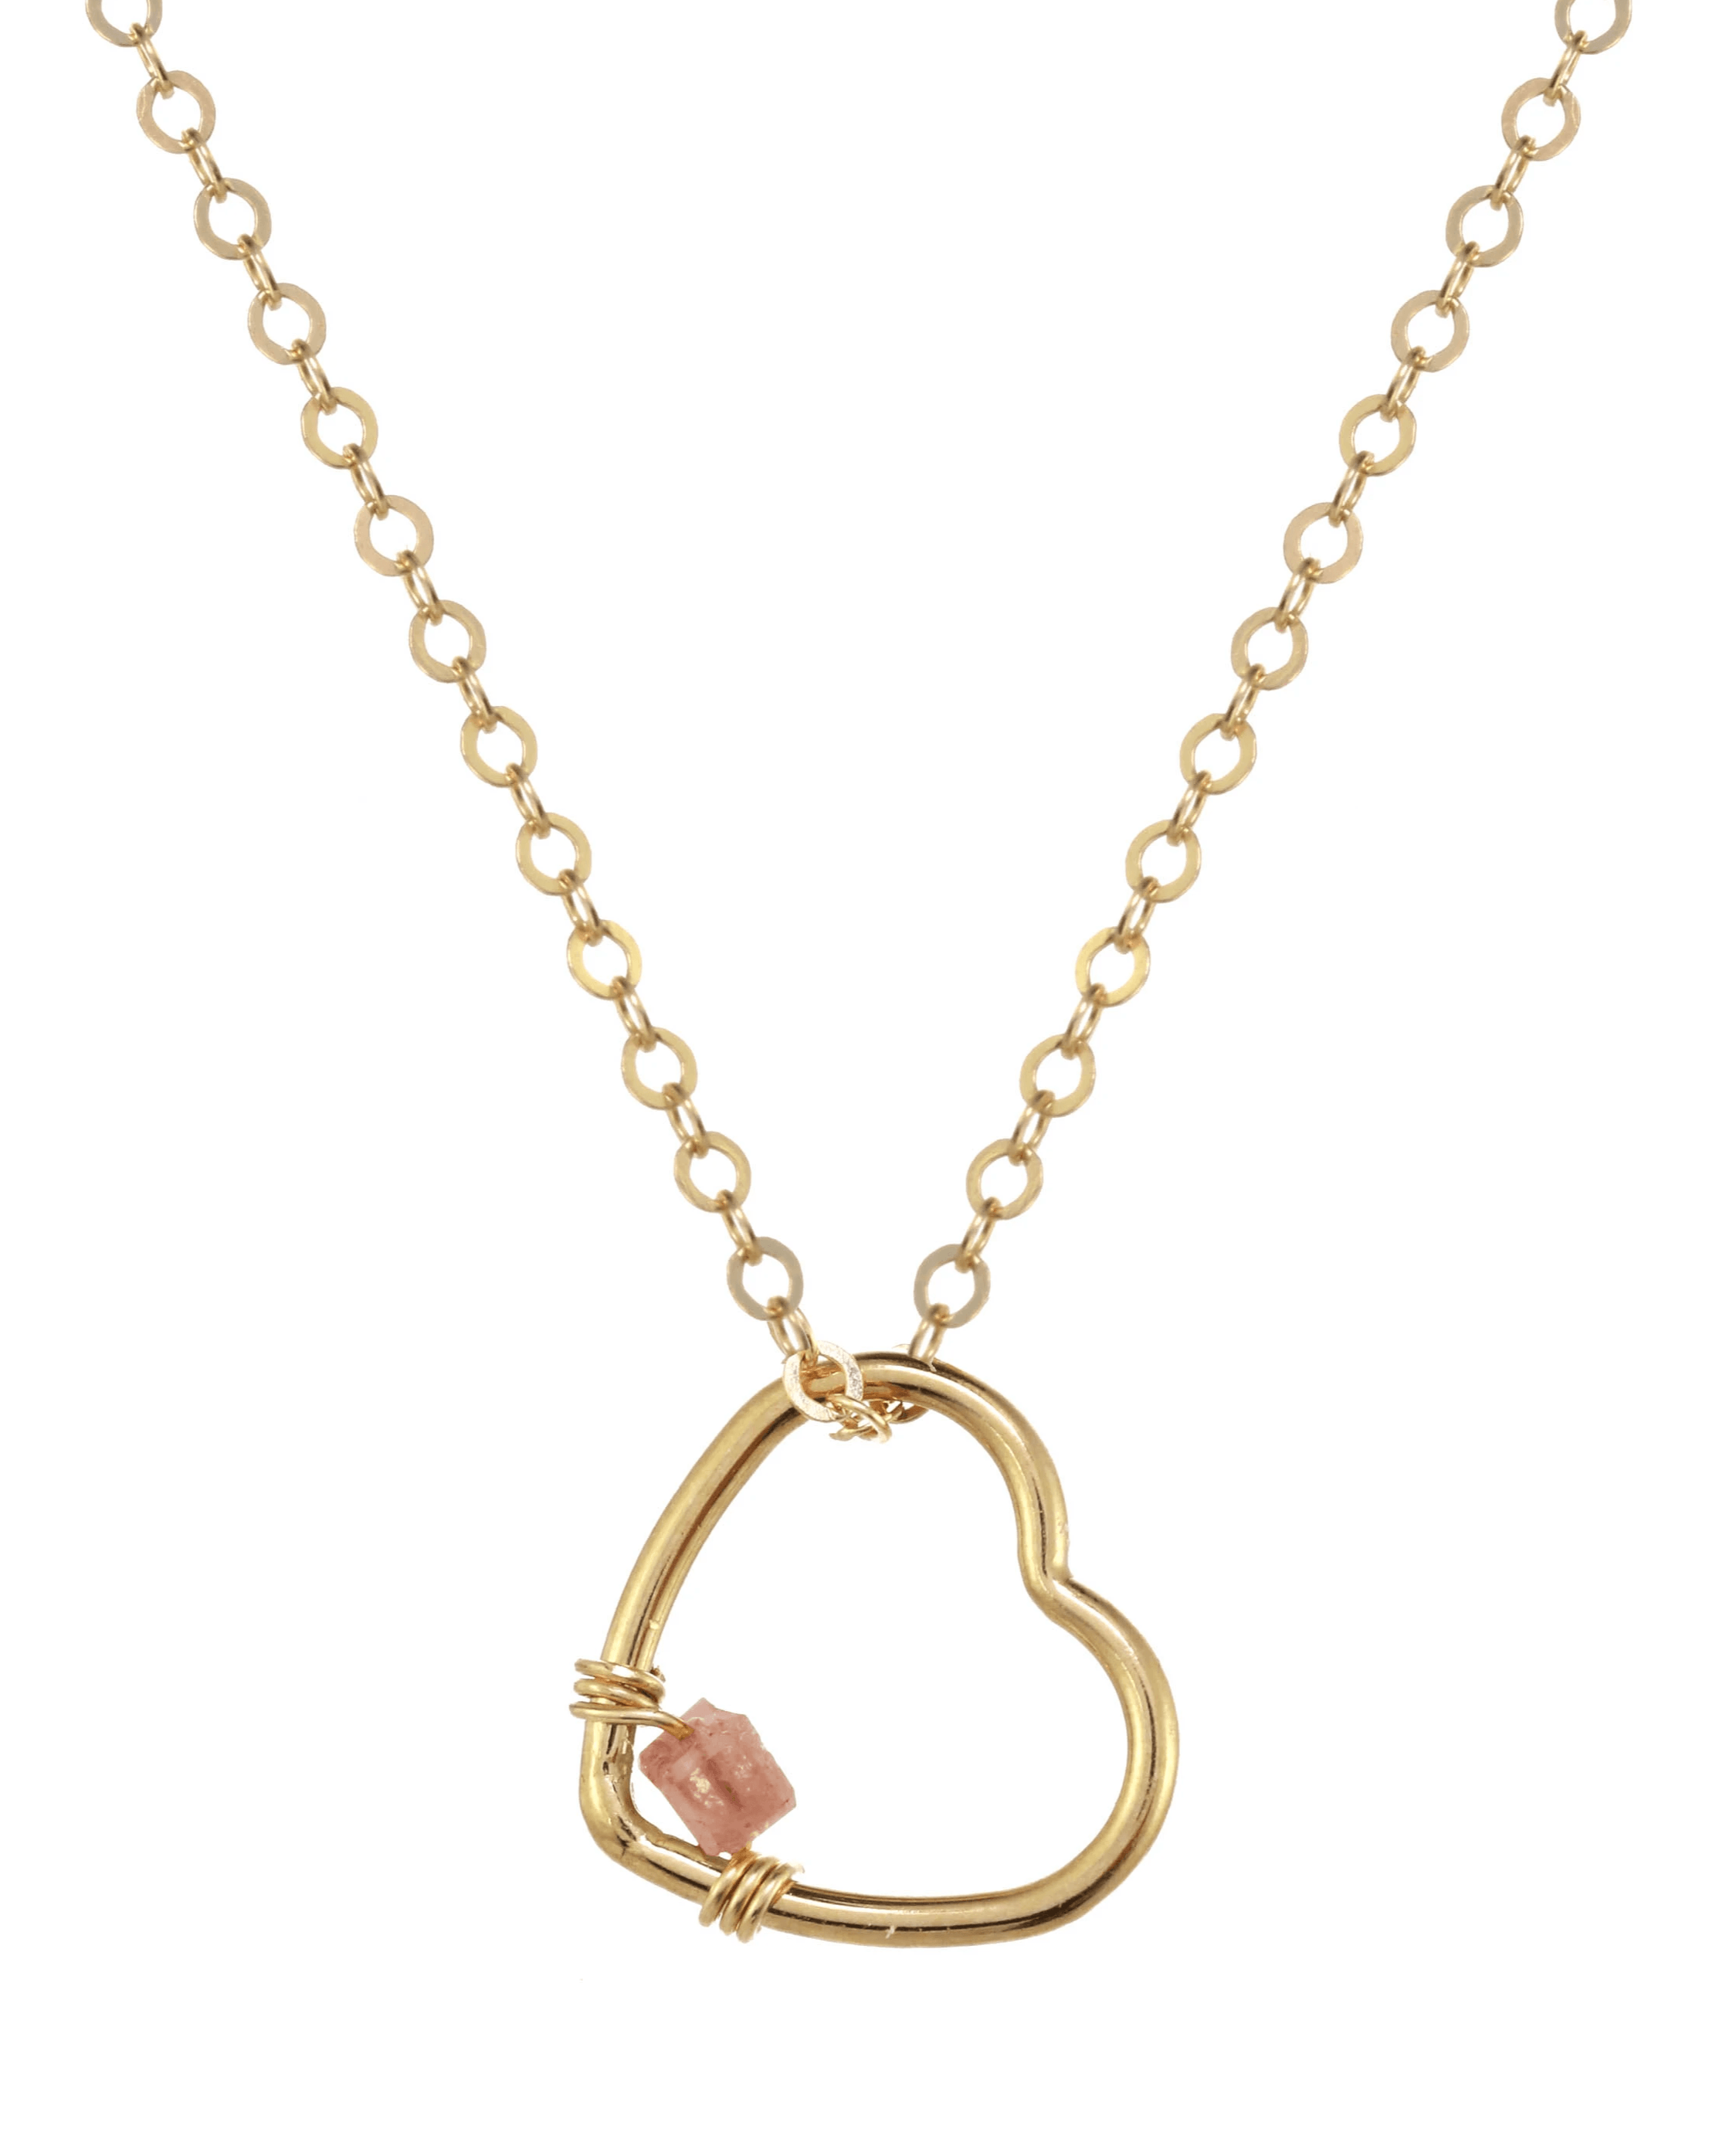 Amorcito Necklace by KOZAKH. A 16 to 18 inch adjustable length necklace in 14K Gold Filled, featuring a heart shaped charm with a square cut Brown Diamond.